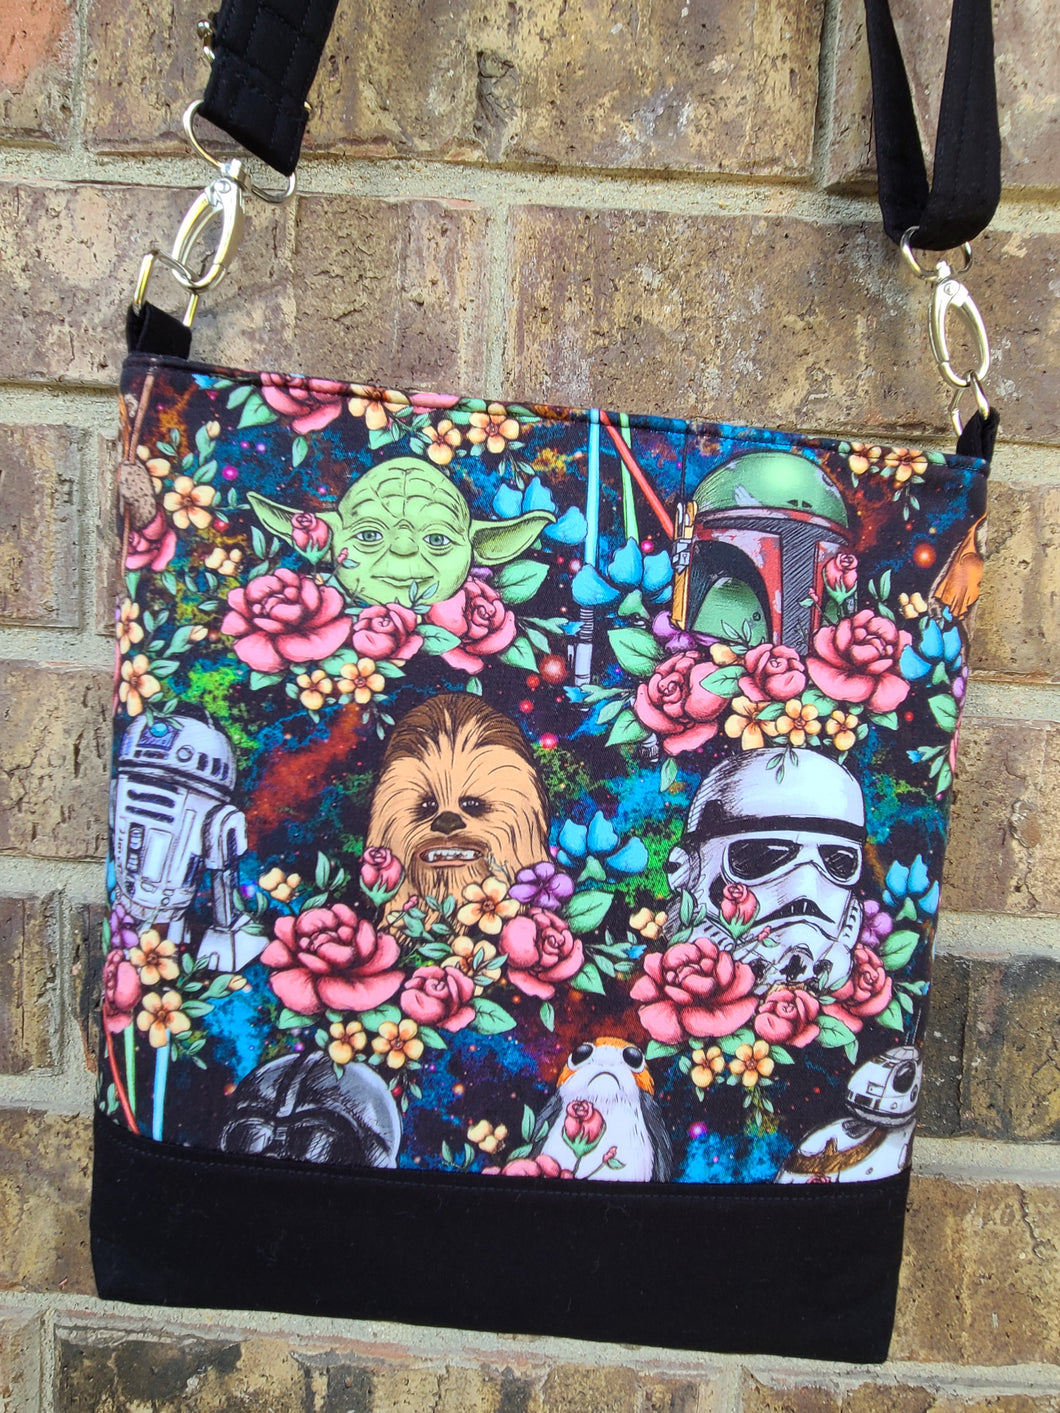 Messenger Bag Made With Stars And Flowers Inspired Fabric - Adjustable Strap - Zippered Closure - Zippered Pocket - Cross Body Bag